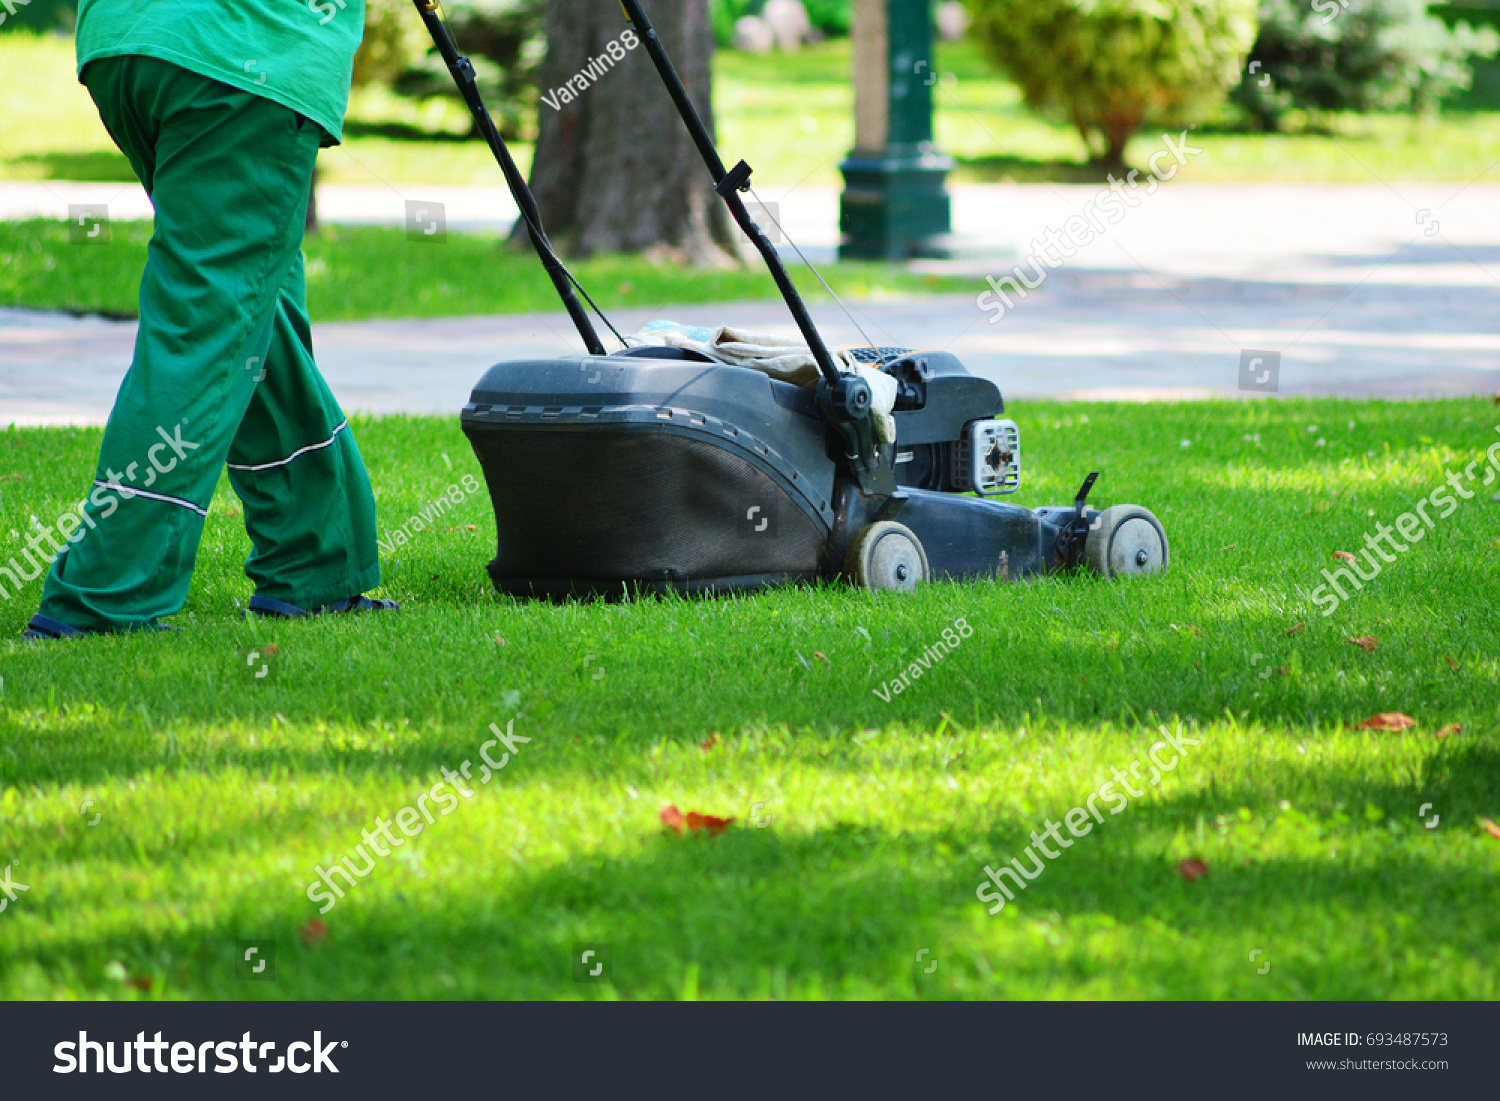 A garden worker takes on a lawn with a lawn mower. Lawn mowing. #693487573